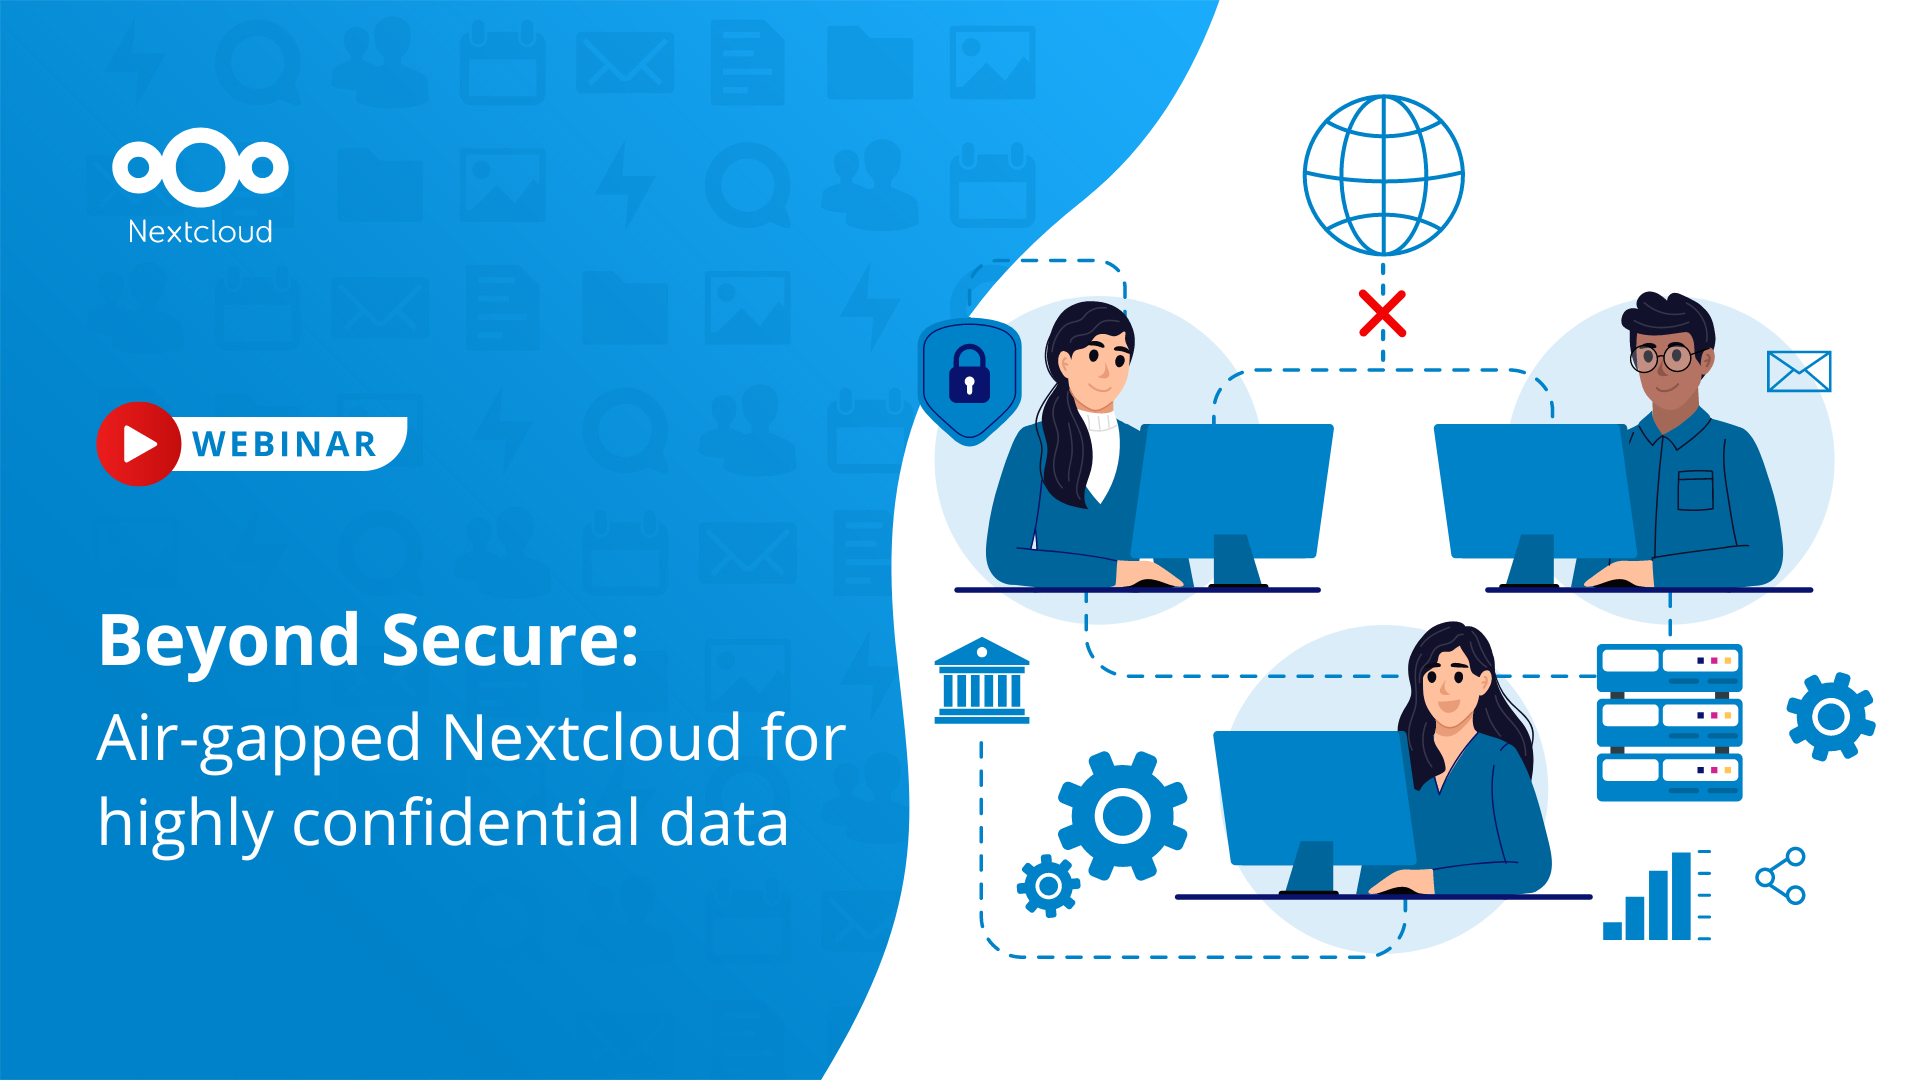 Join us for an exclusive webinar on May 22nd at 3 pm CEST / 9 am EDT with Joe Dutka, a Sales Engineer at Nextcloud, to learn how you can safeguard hig